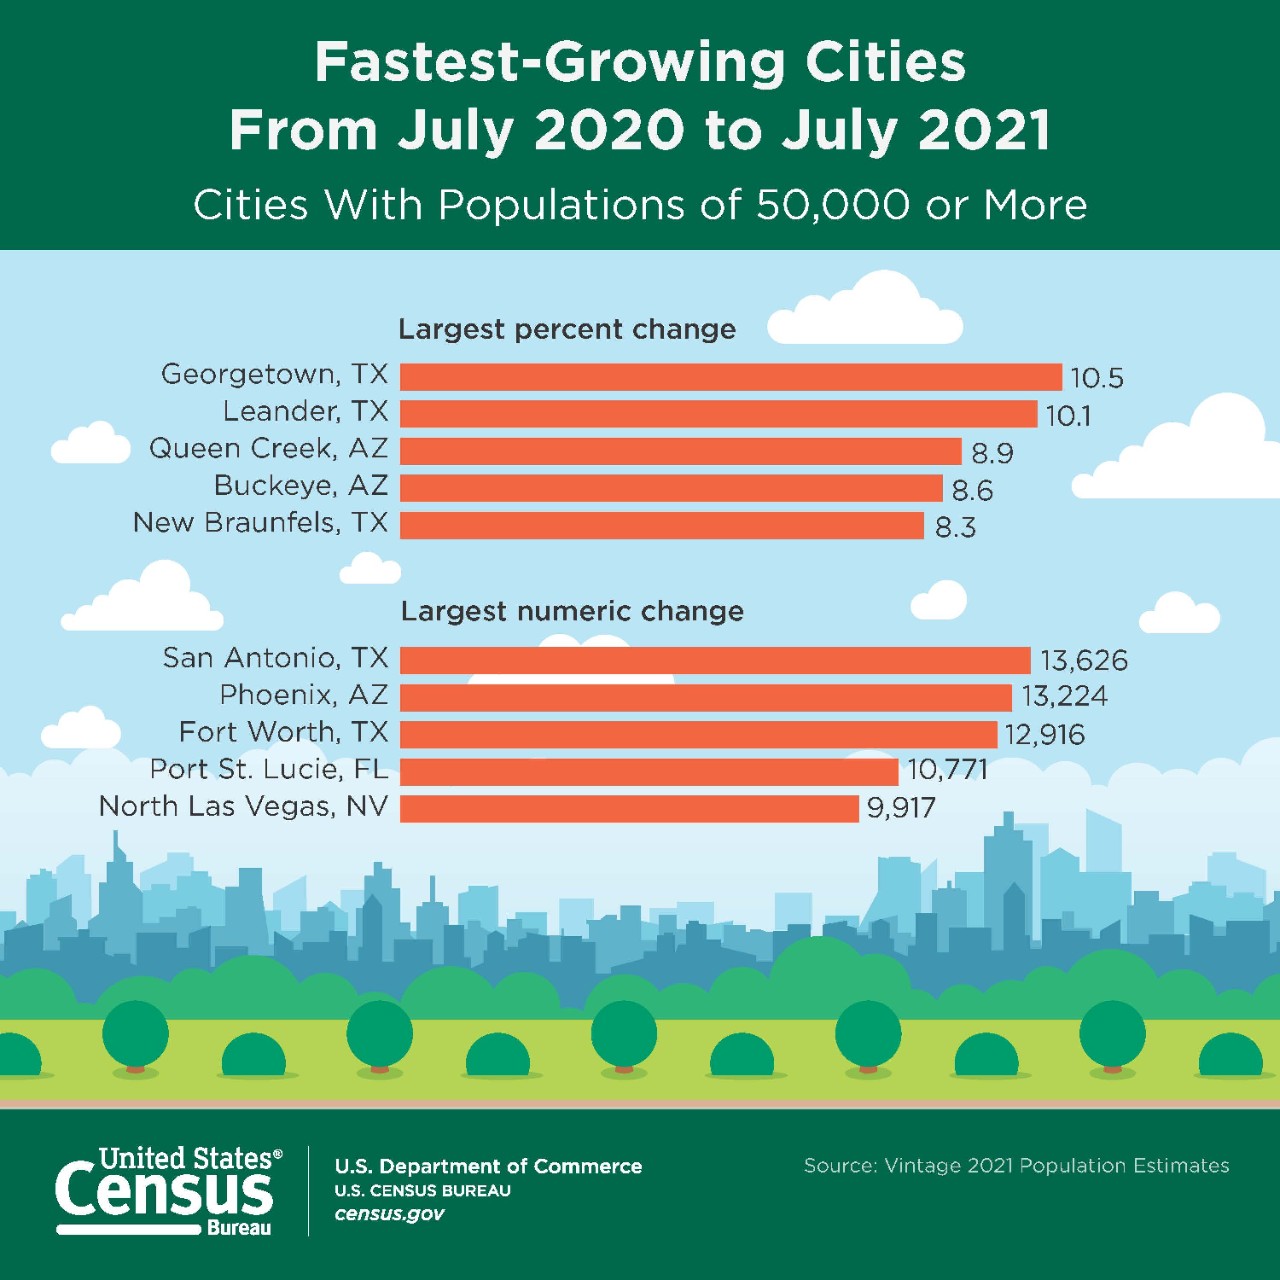 Fastest-Growing Cities From July 2020 to July 2021 